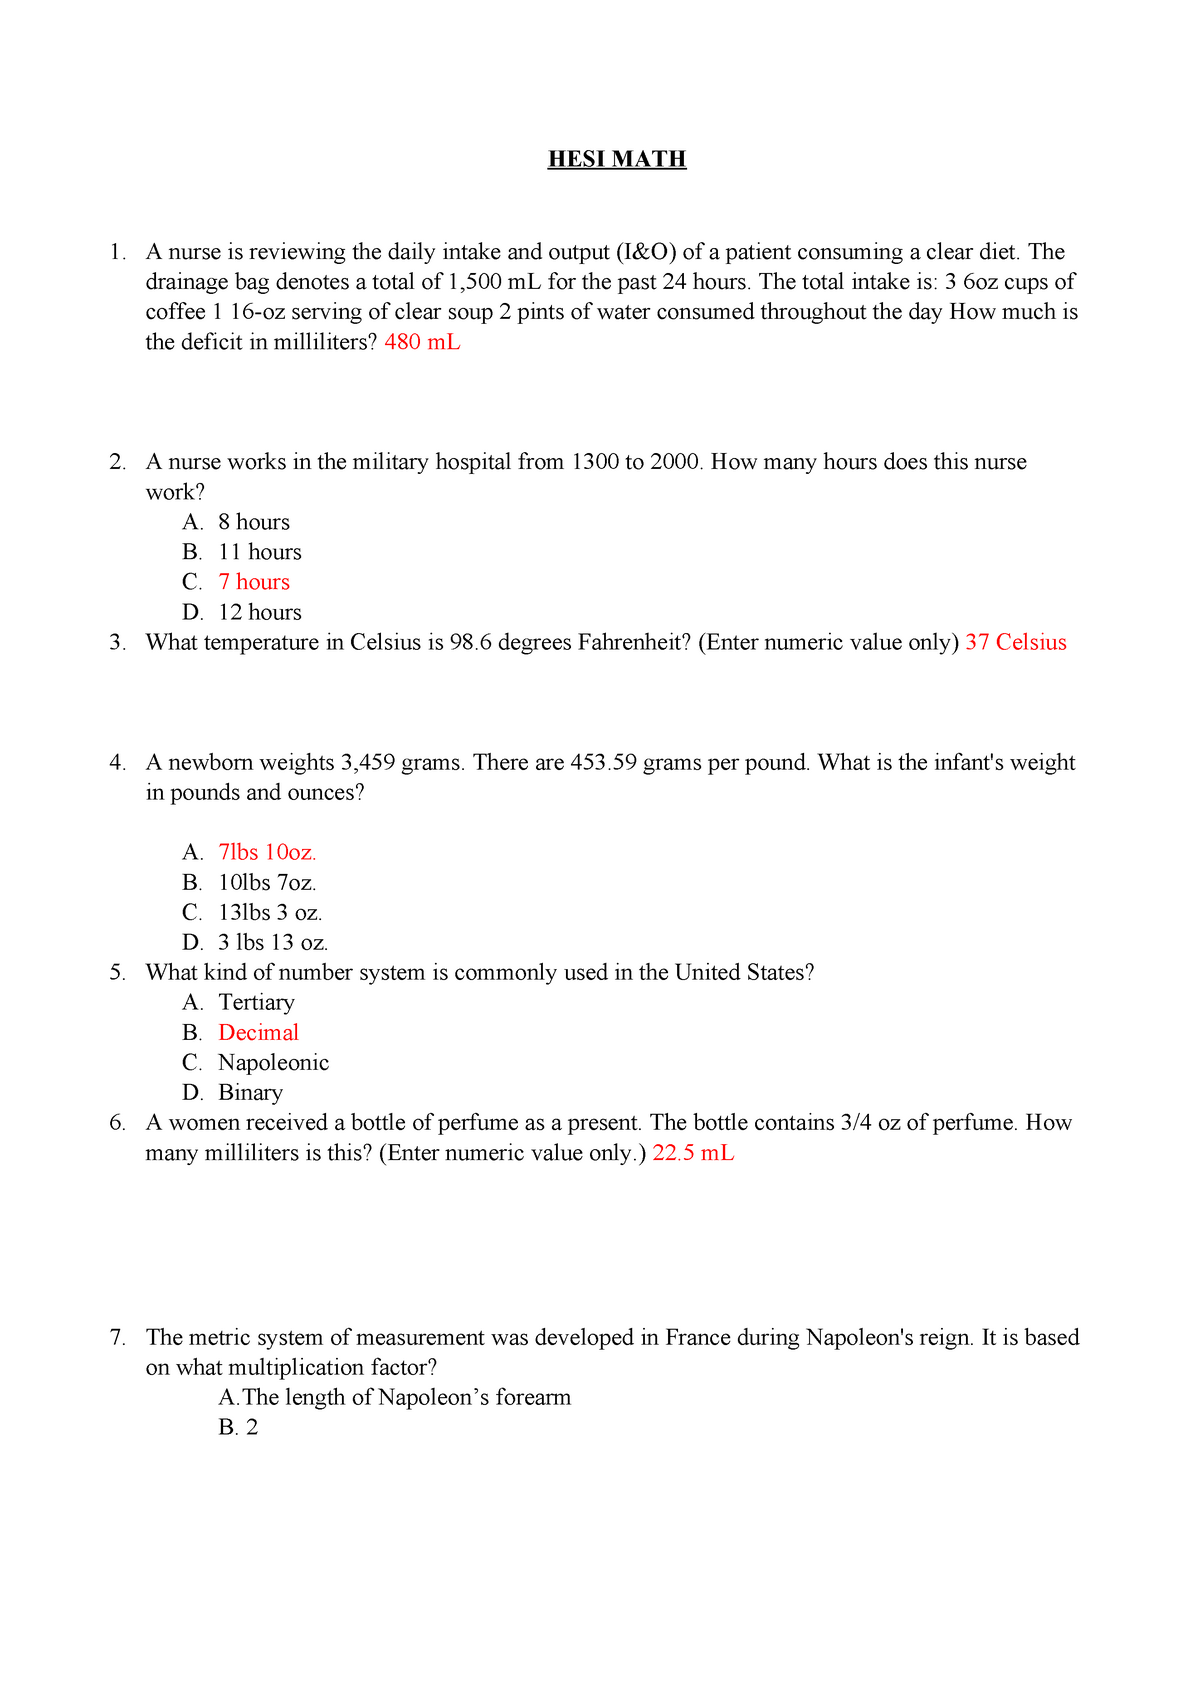 hesi-math-questions-with-answers-all-correct-study-guid-hesi